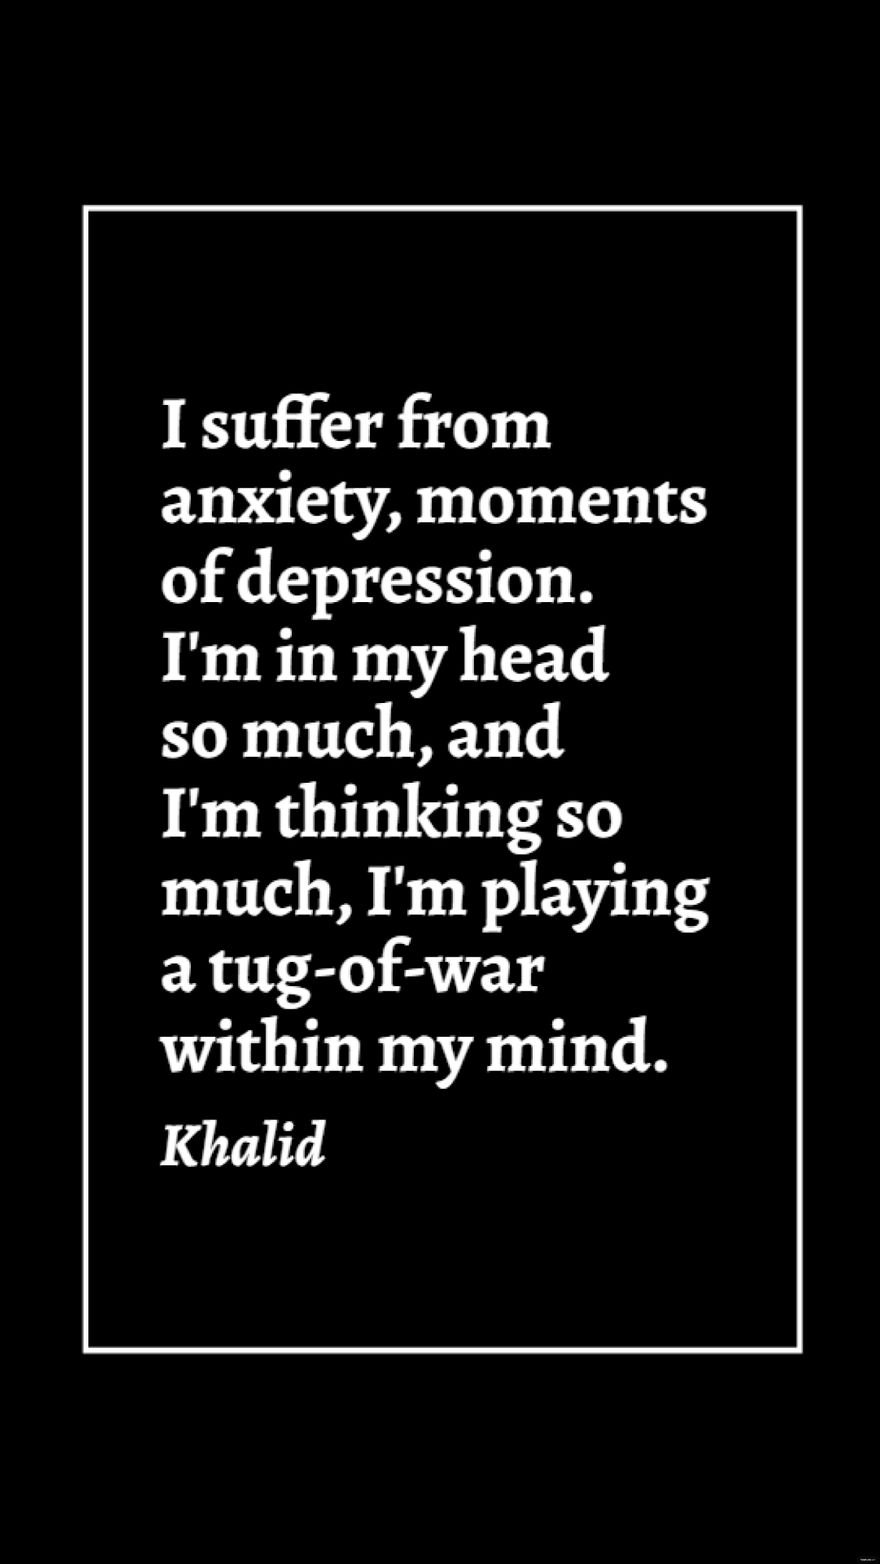 Khalid - I suffer from anxiety, moments of depression. I'm in my head so much, and I'm thinking so much, I'm playing a tug-of-war within my mind.